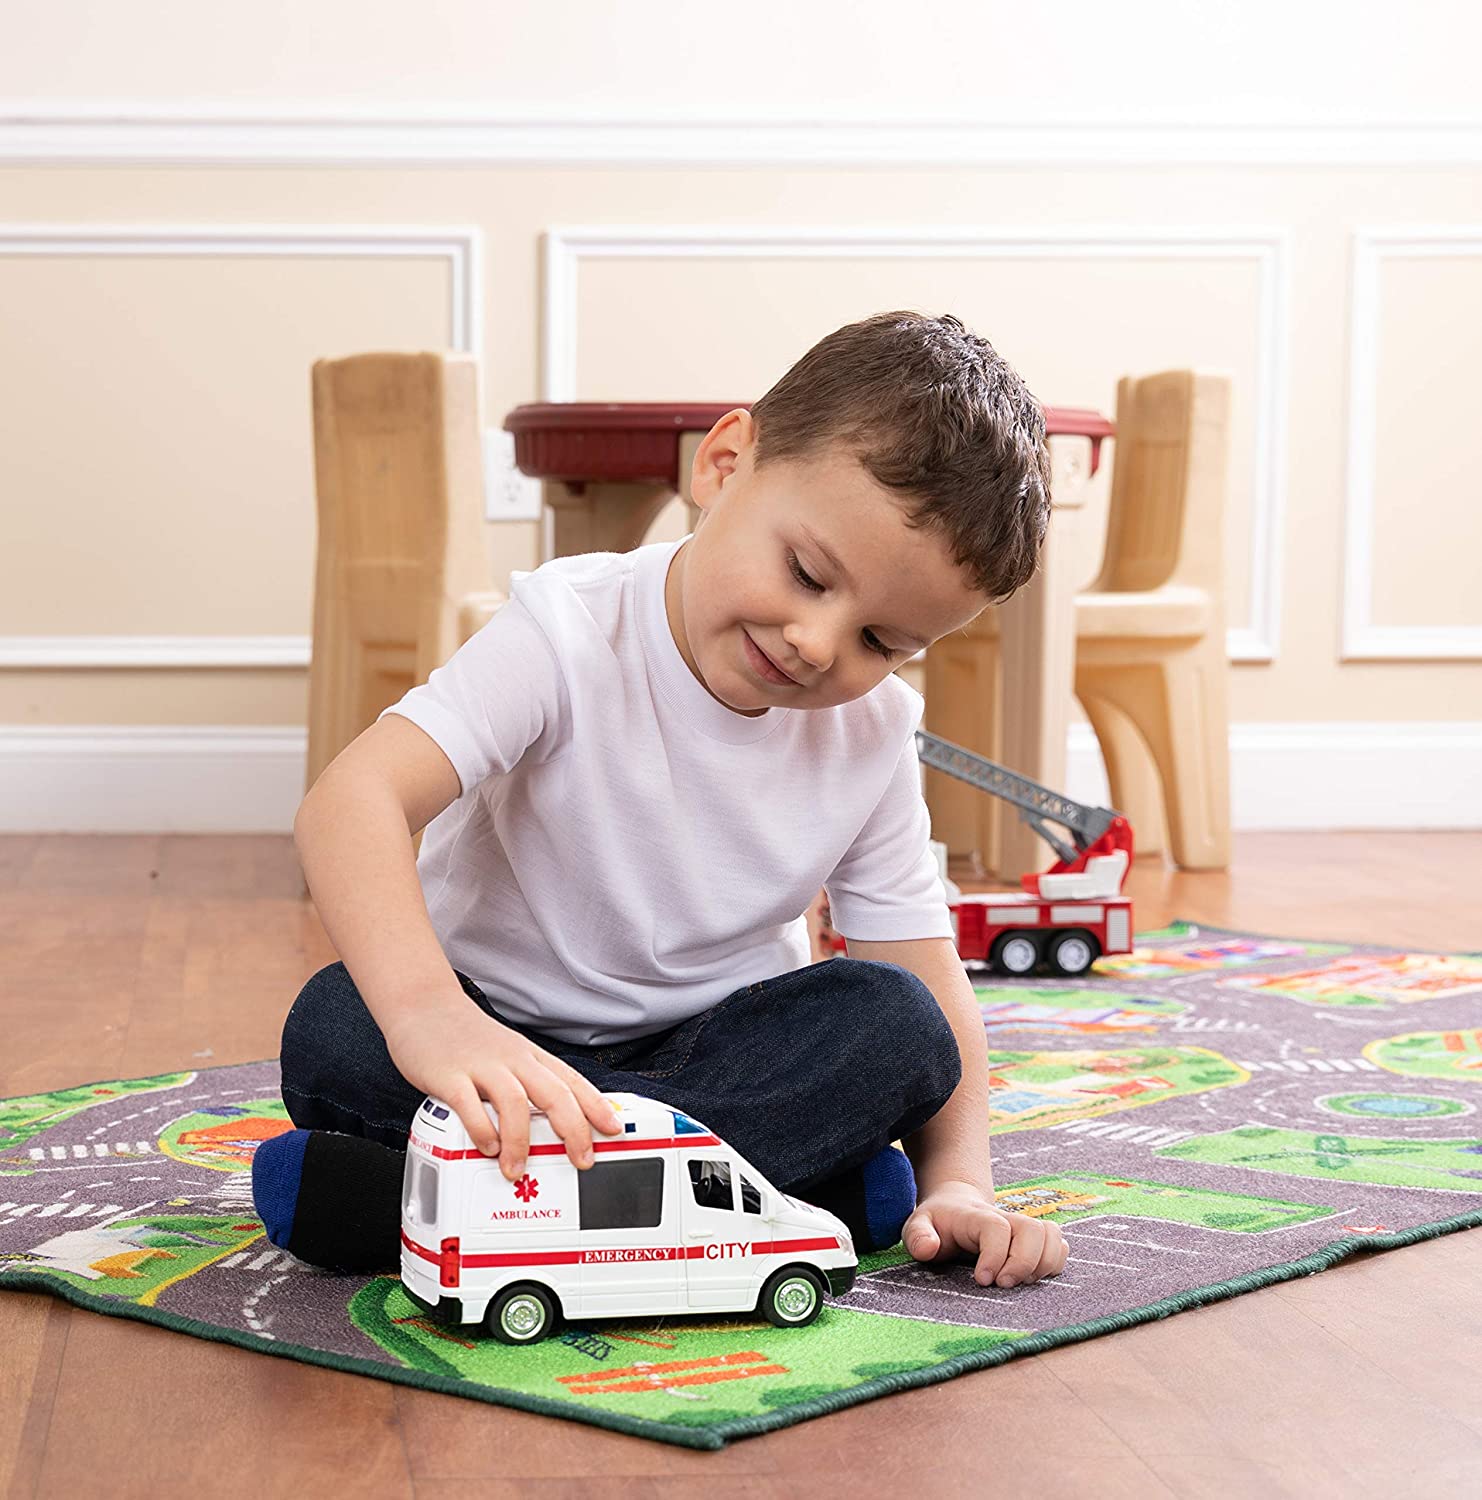 FREE -  Ambulance Toy Car Toy for Kids 6+